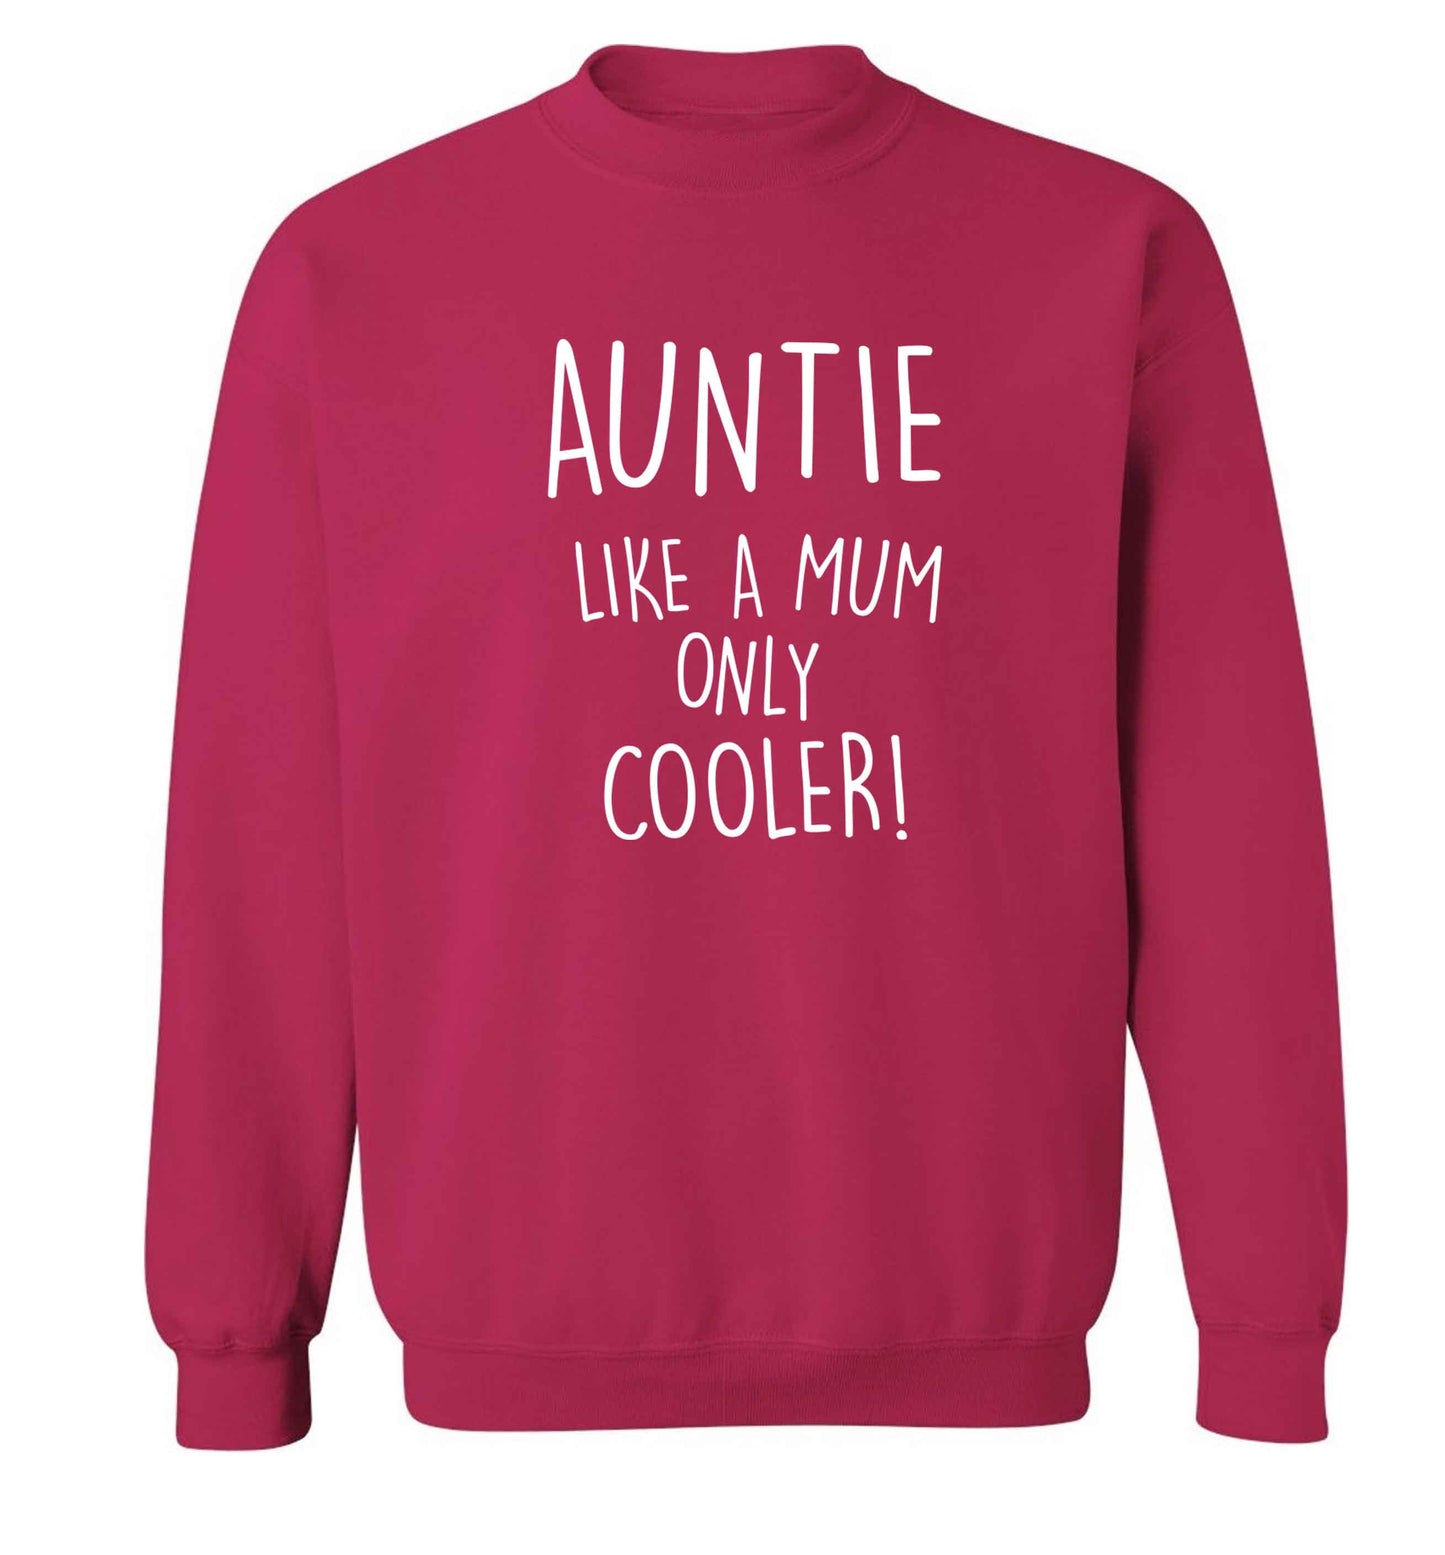 Auntie like a mum only cooler adult's unisex pink sweater 2XL